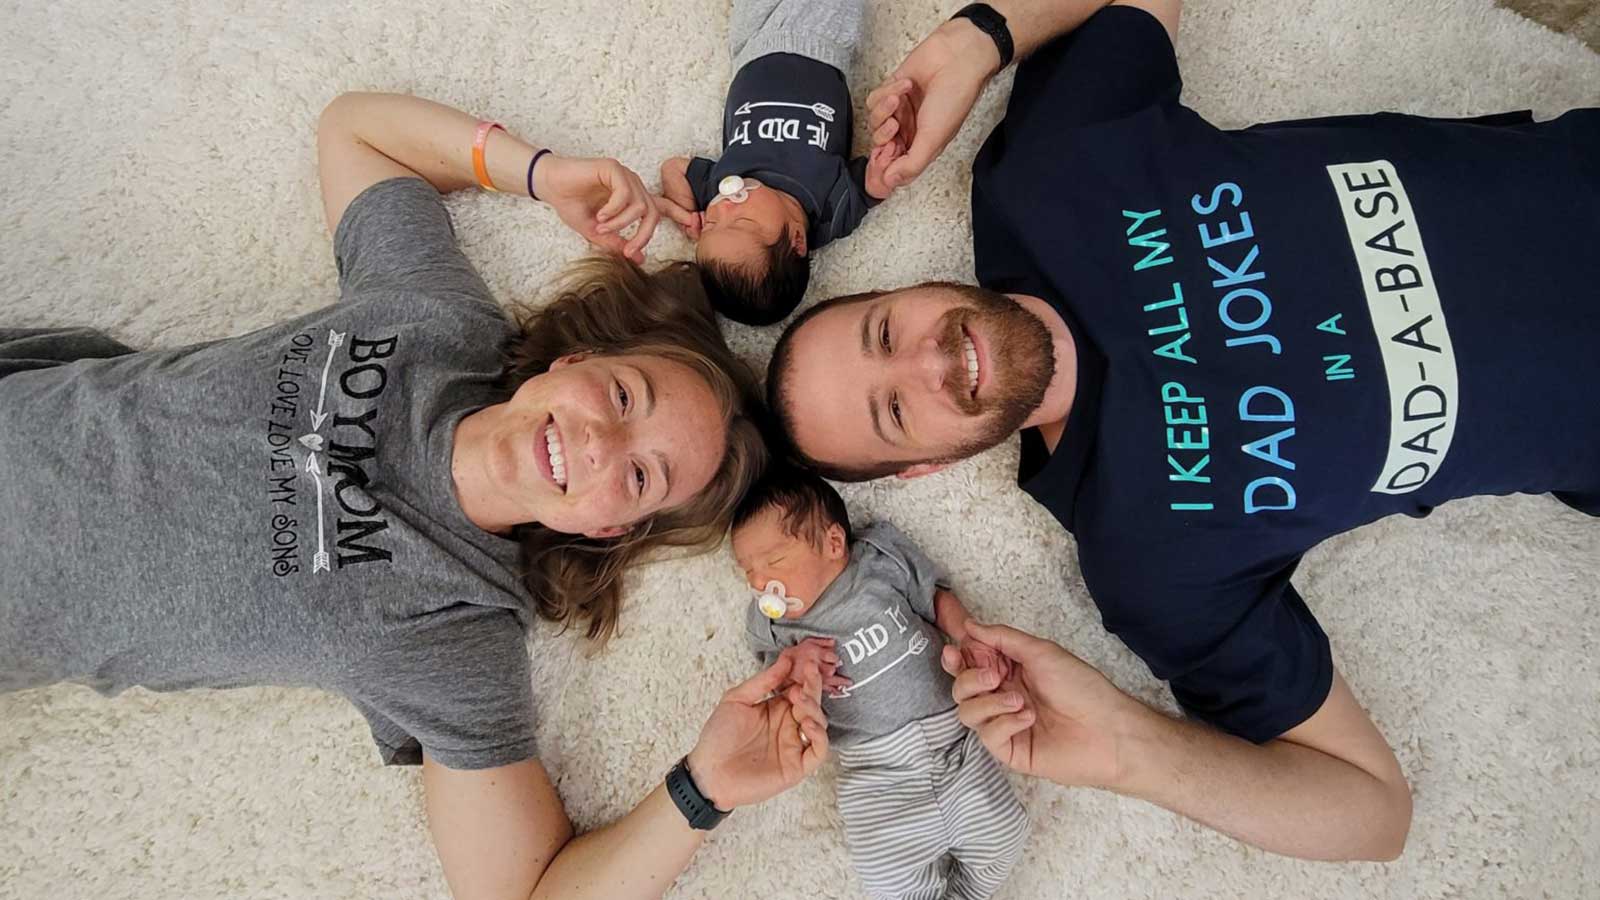 U.S. adoptive family smiling on floor with twin babies